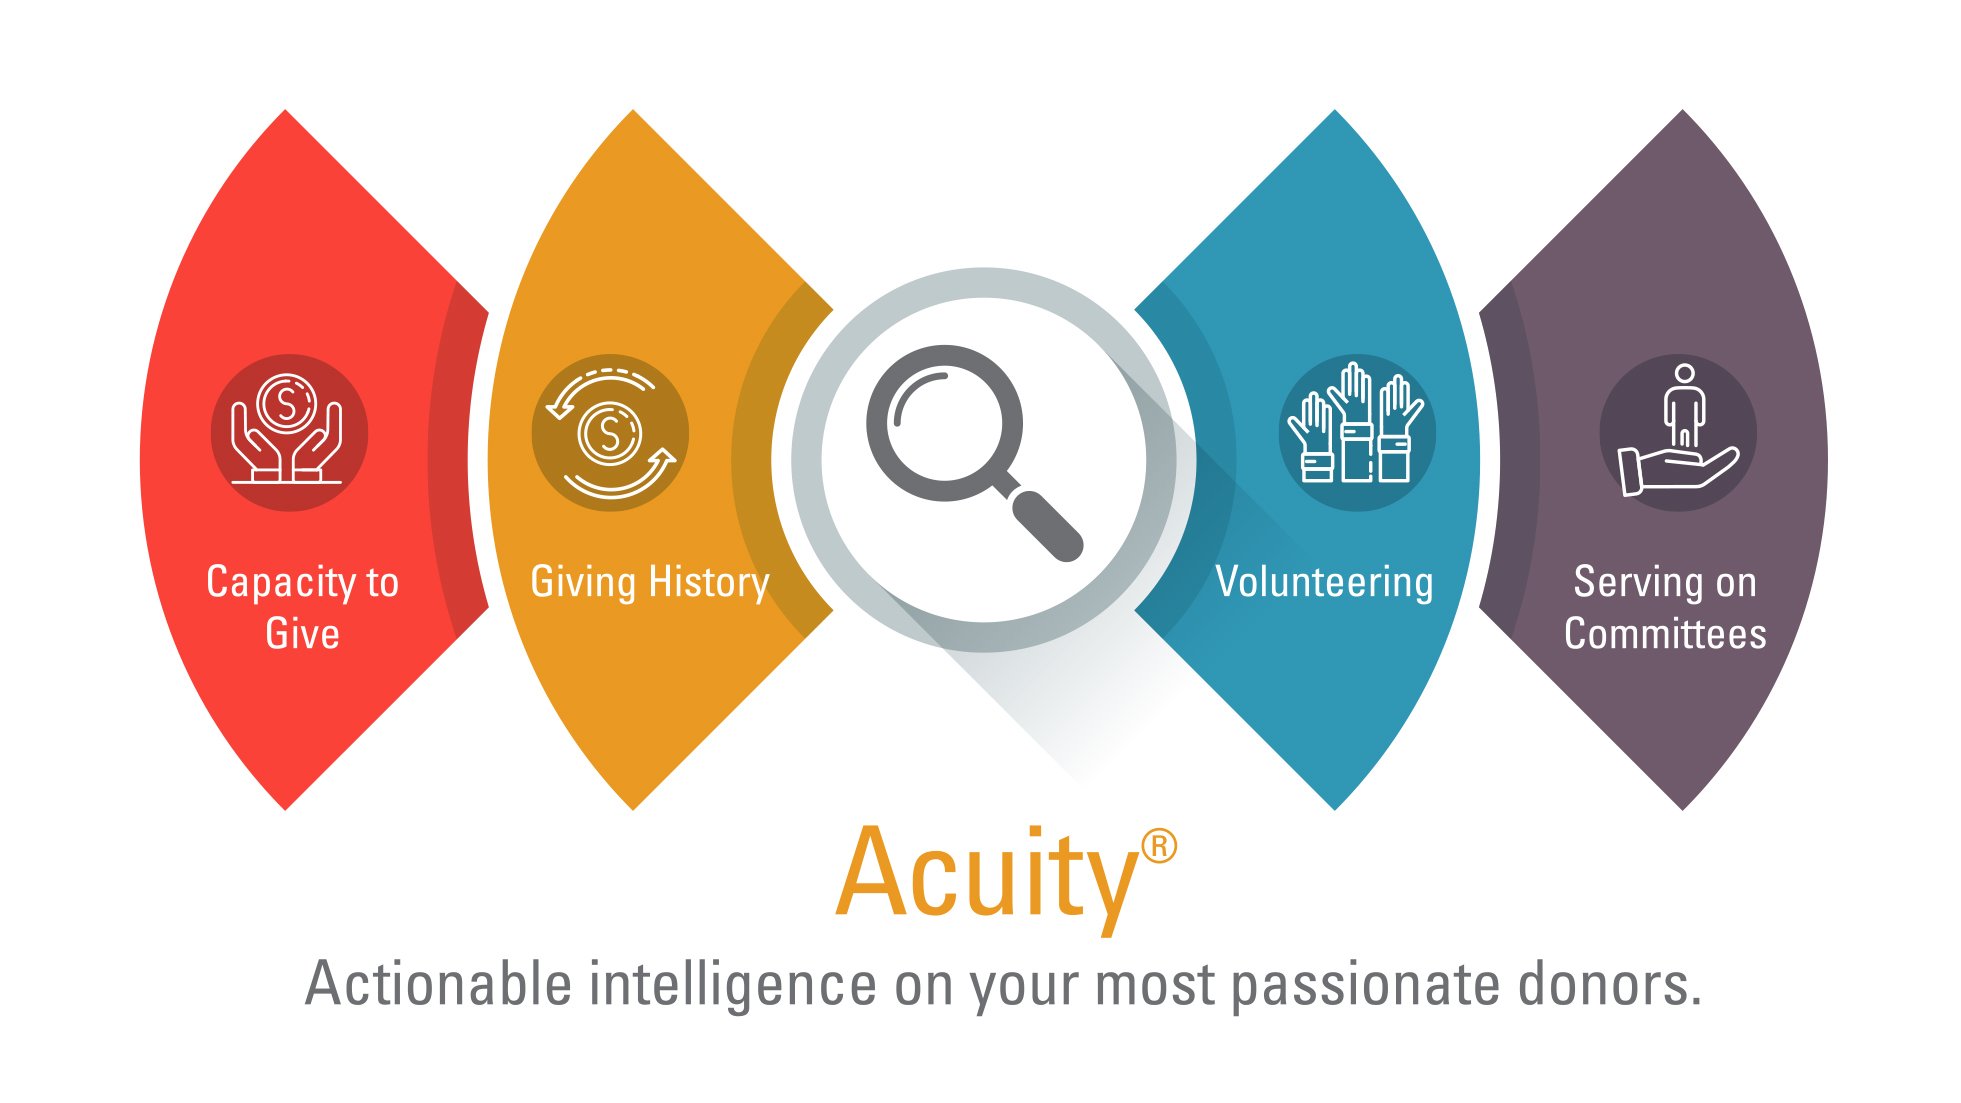 Acuity Actionable intelligence on your most passionate donors